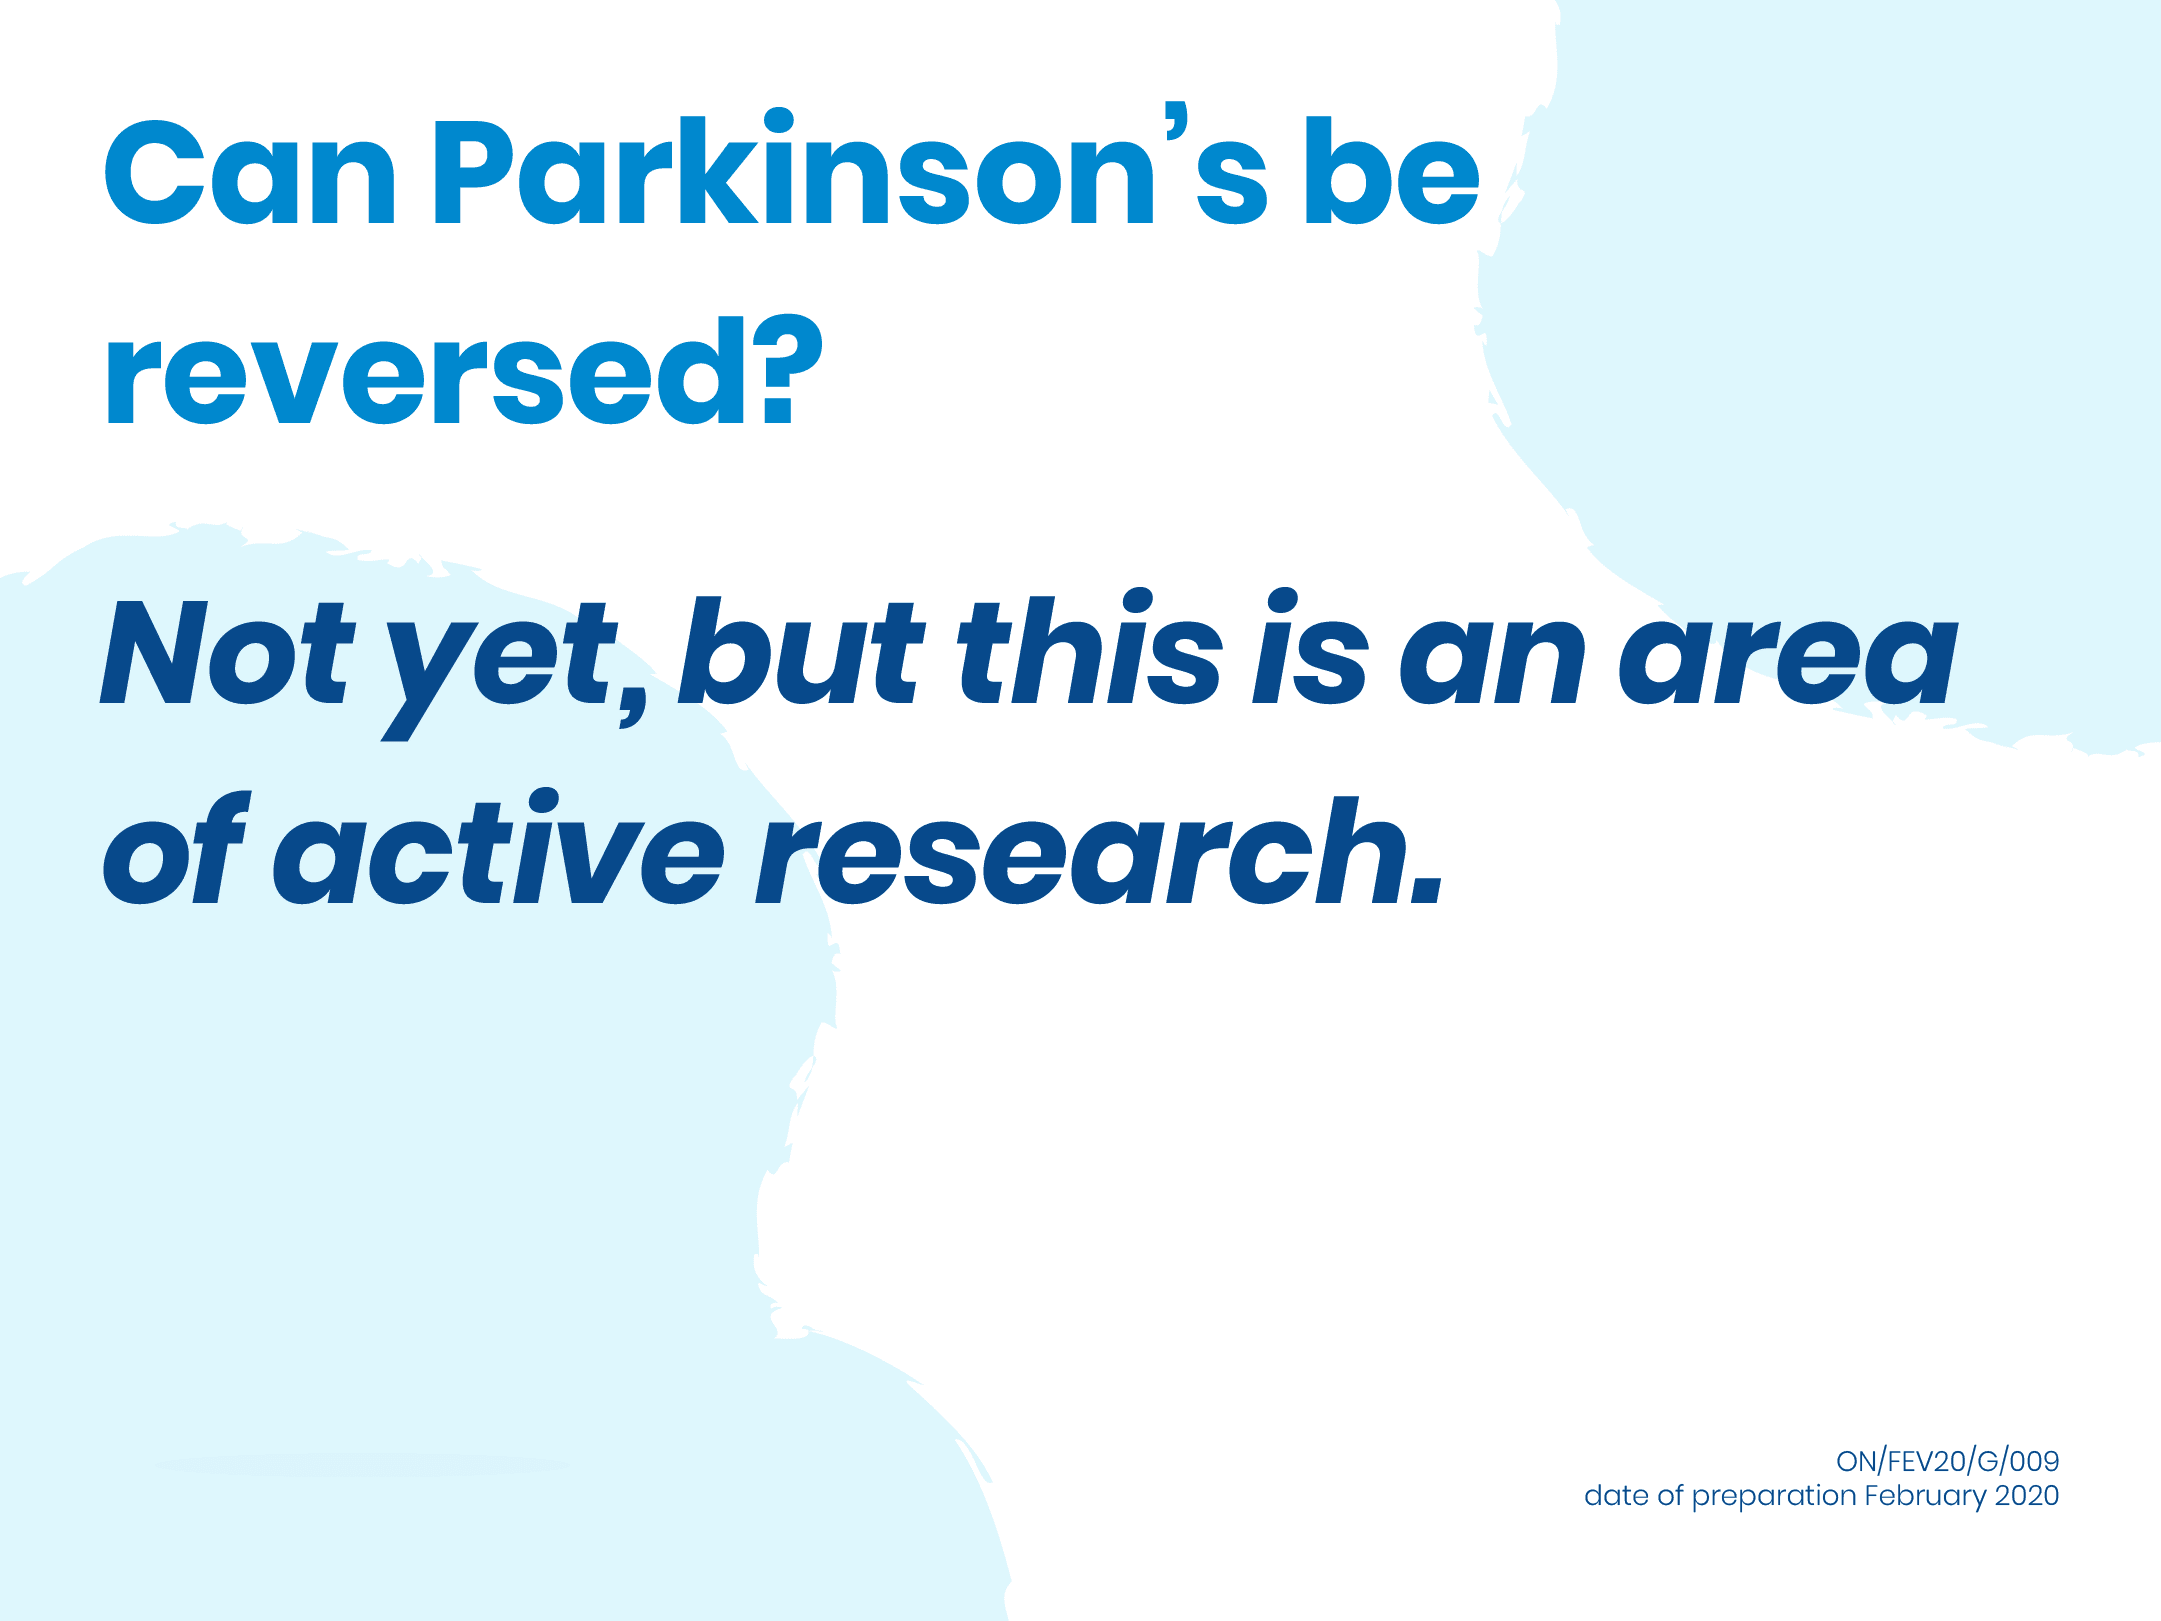 Can Parkinson's be reversed?